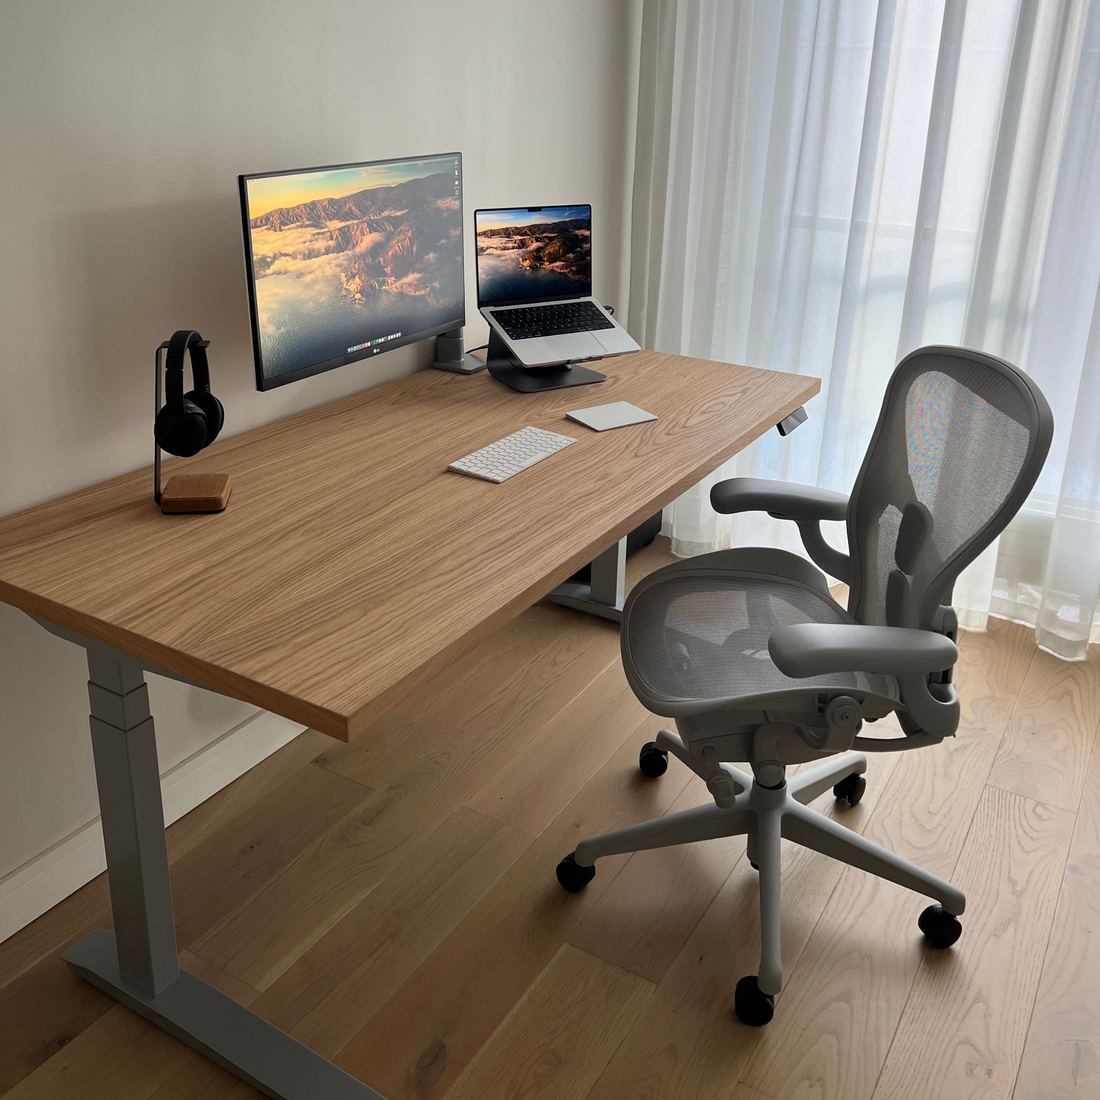  Office and Gaming desk tops